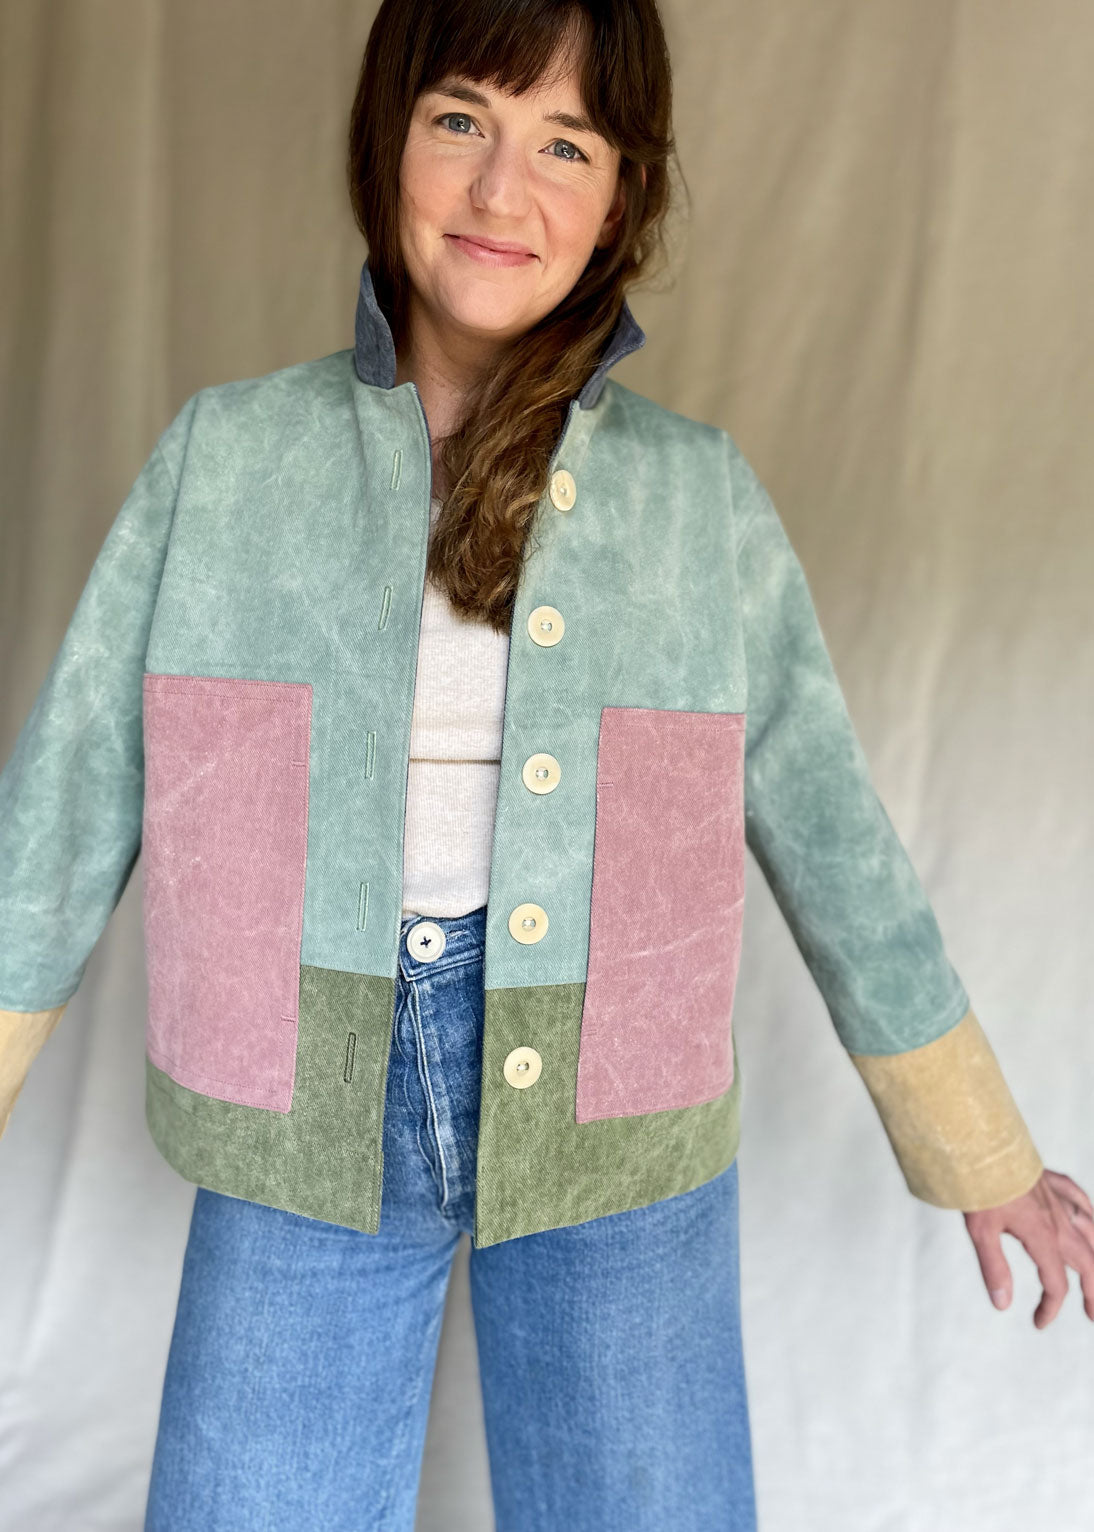 Made-to-order Color Block Jacket: Full color body for Deanna